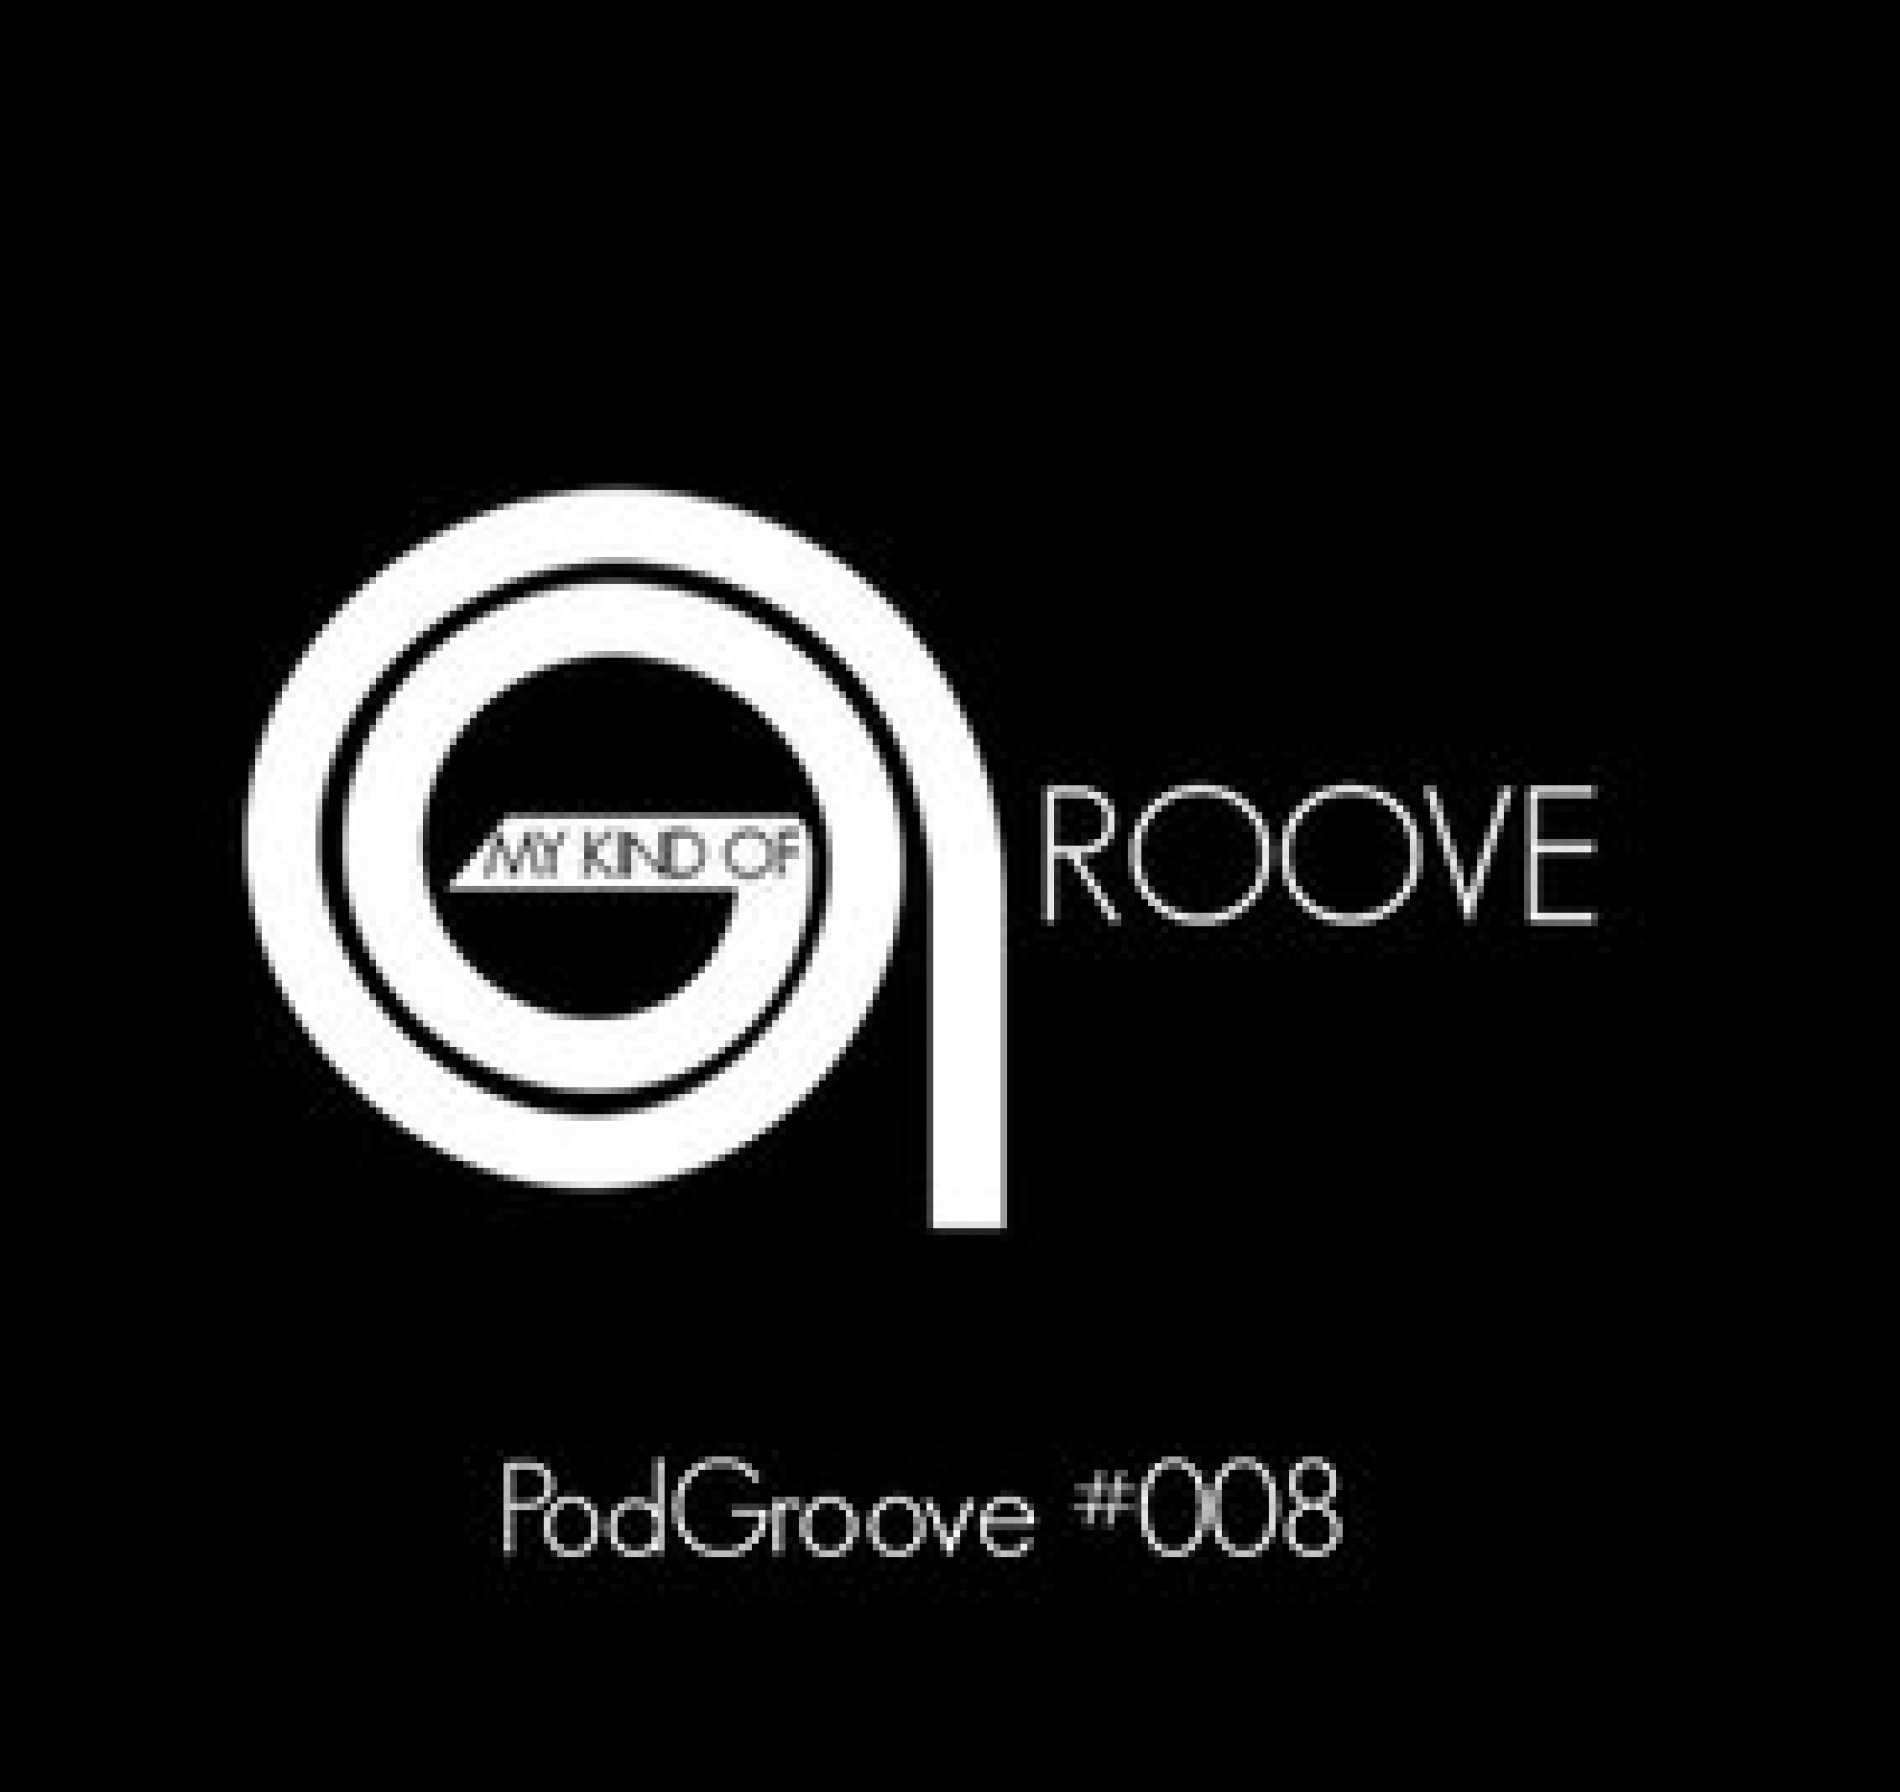 A-JAY: MY KIND OF GROOVE – PODGROOVE #008